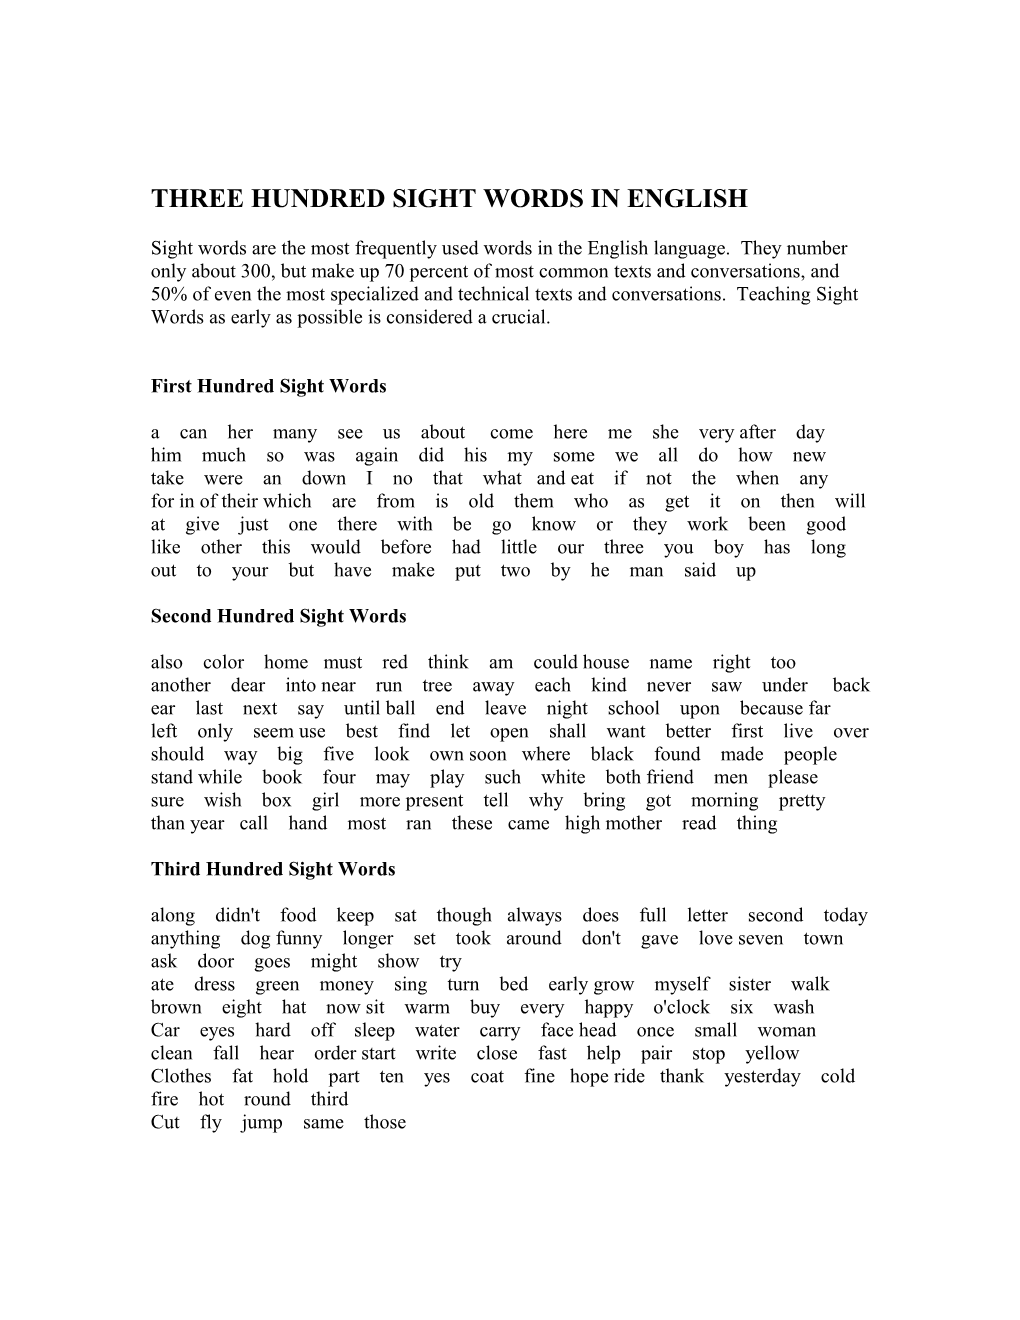 Three Hundred Sight Words in English